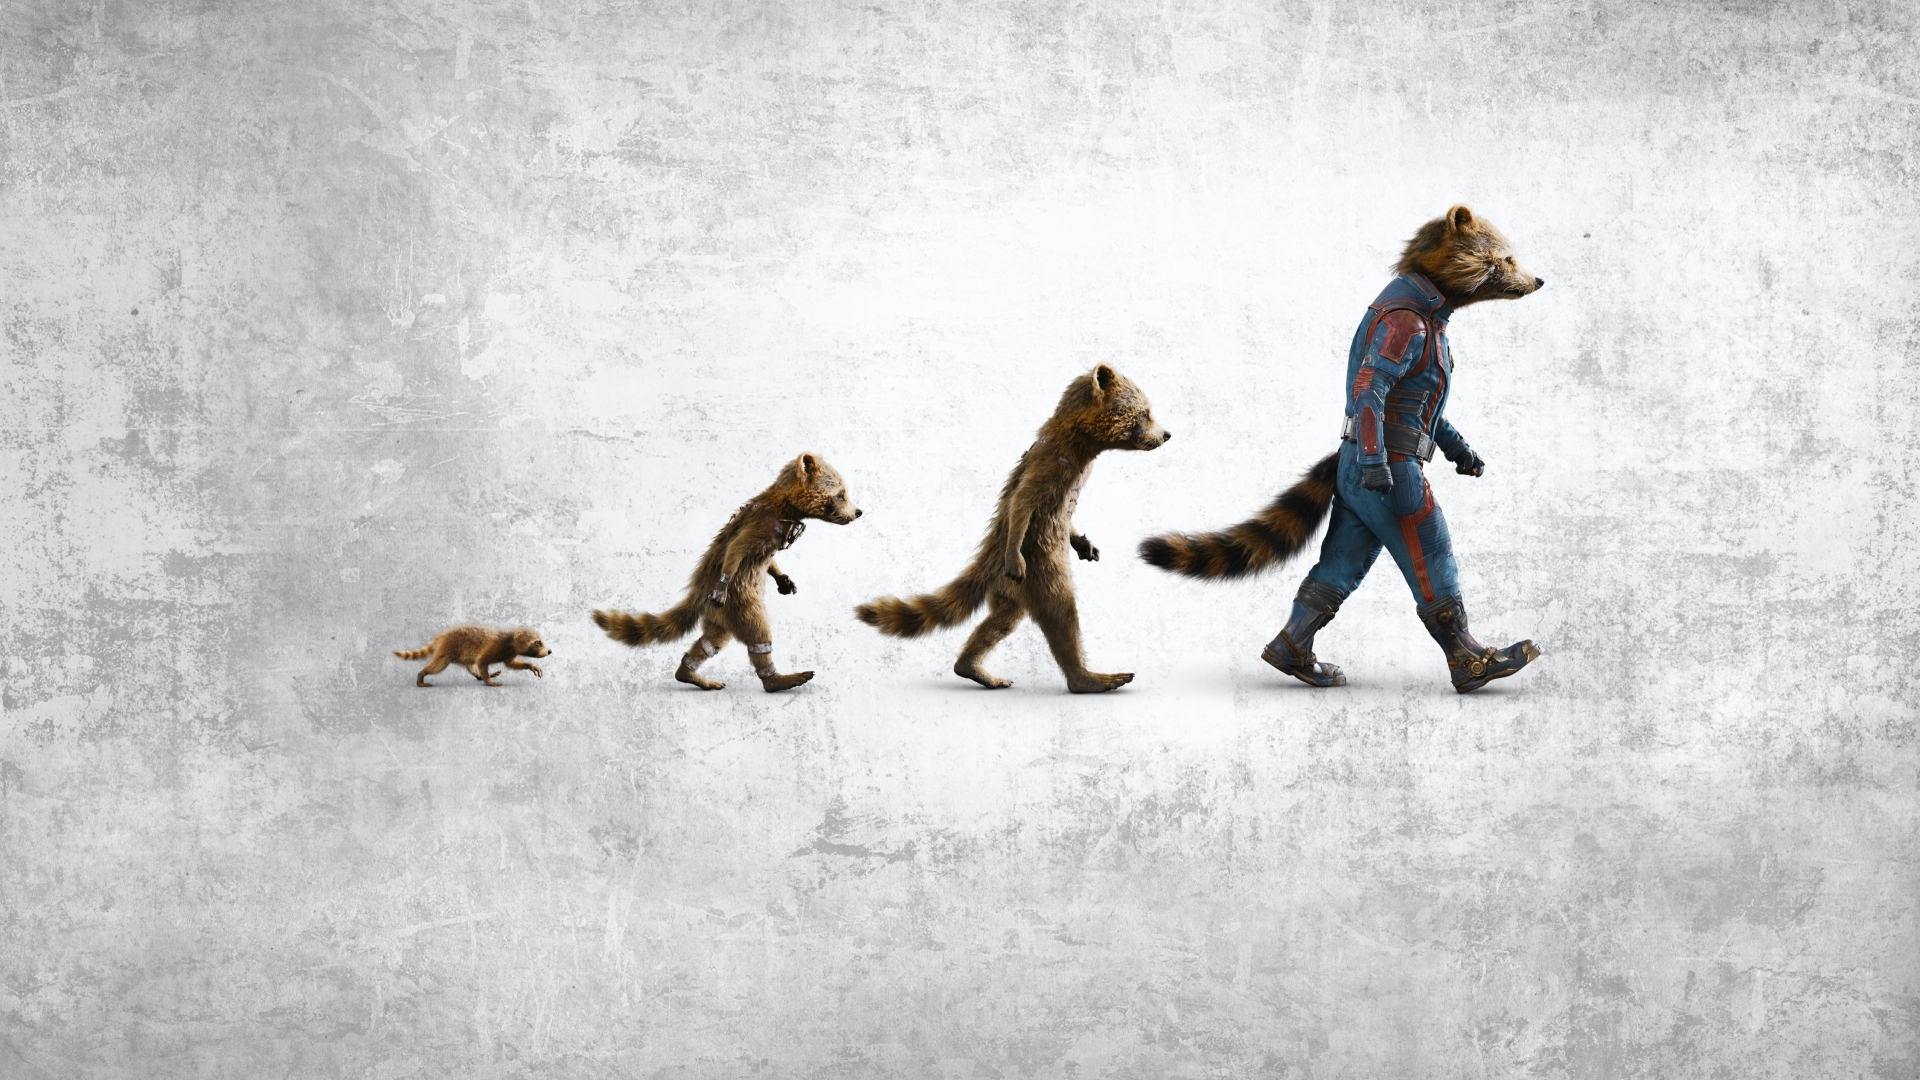 1920x1080 Resolution Rocket Guardians of the Galaxy 3 Captain 1080P ...